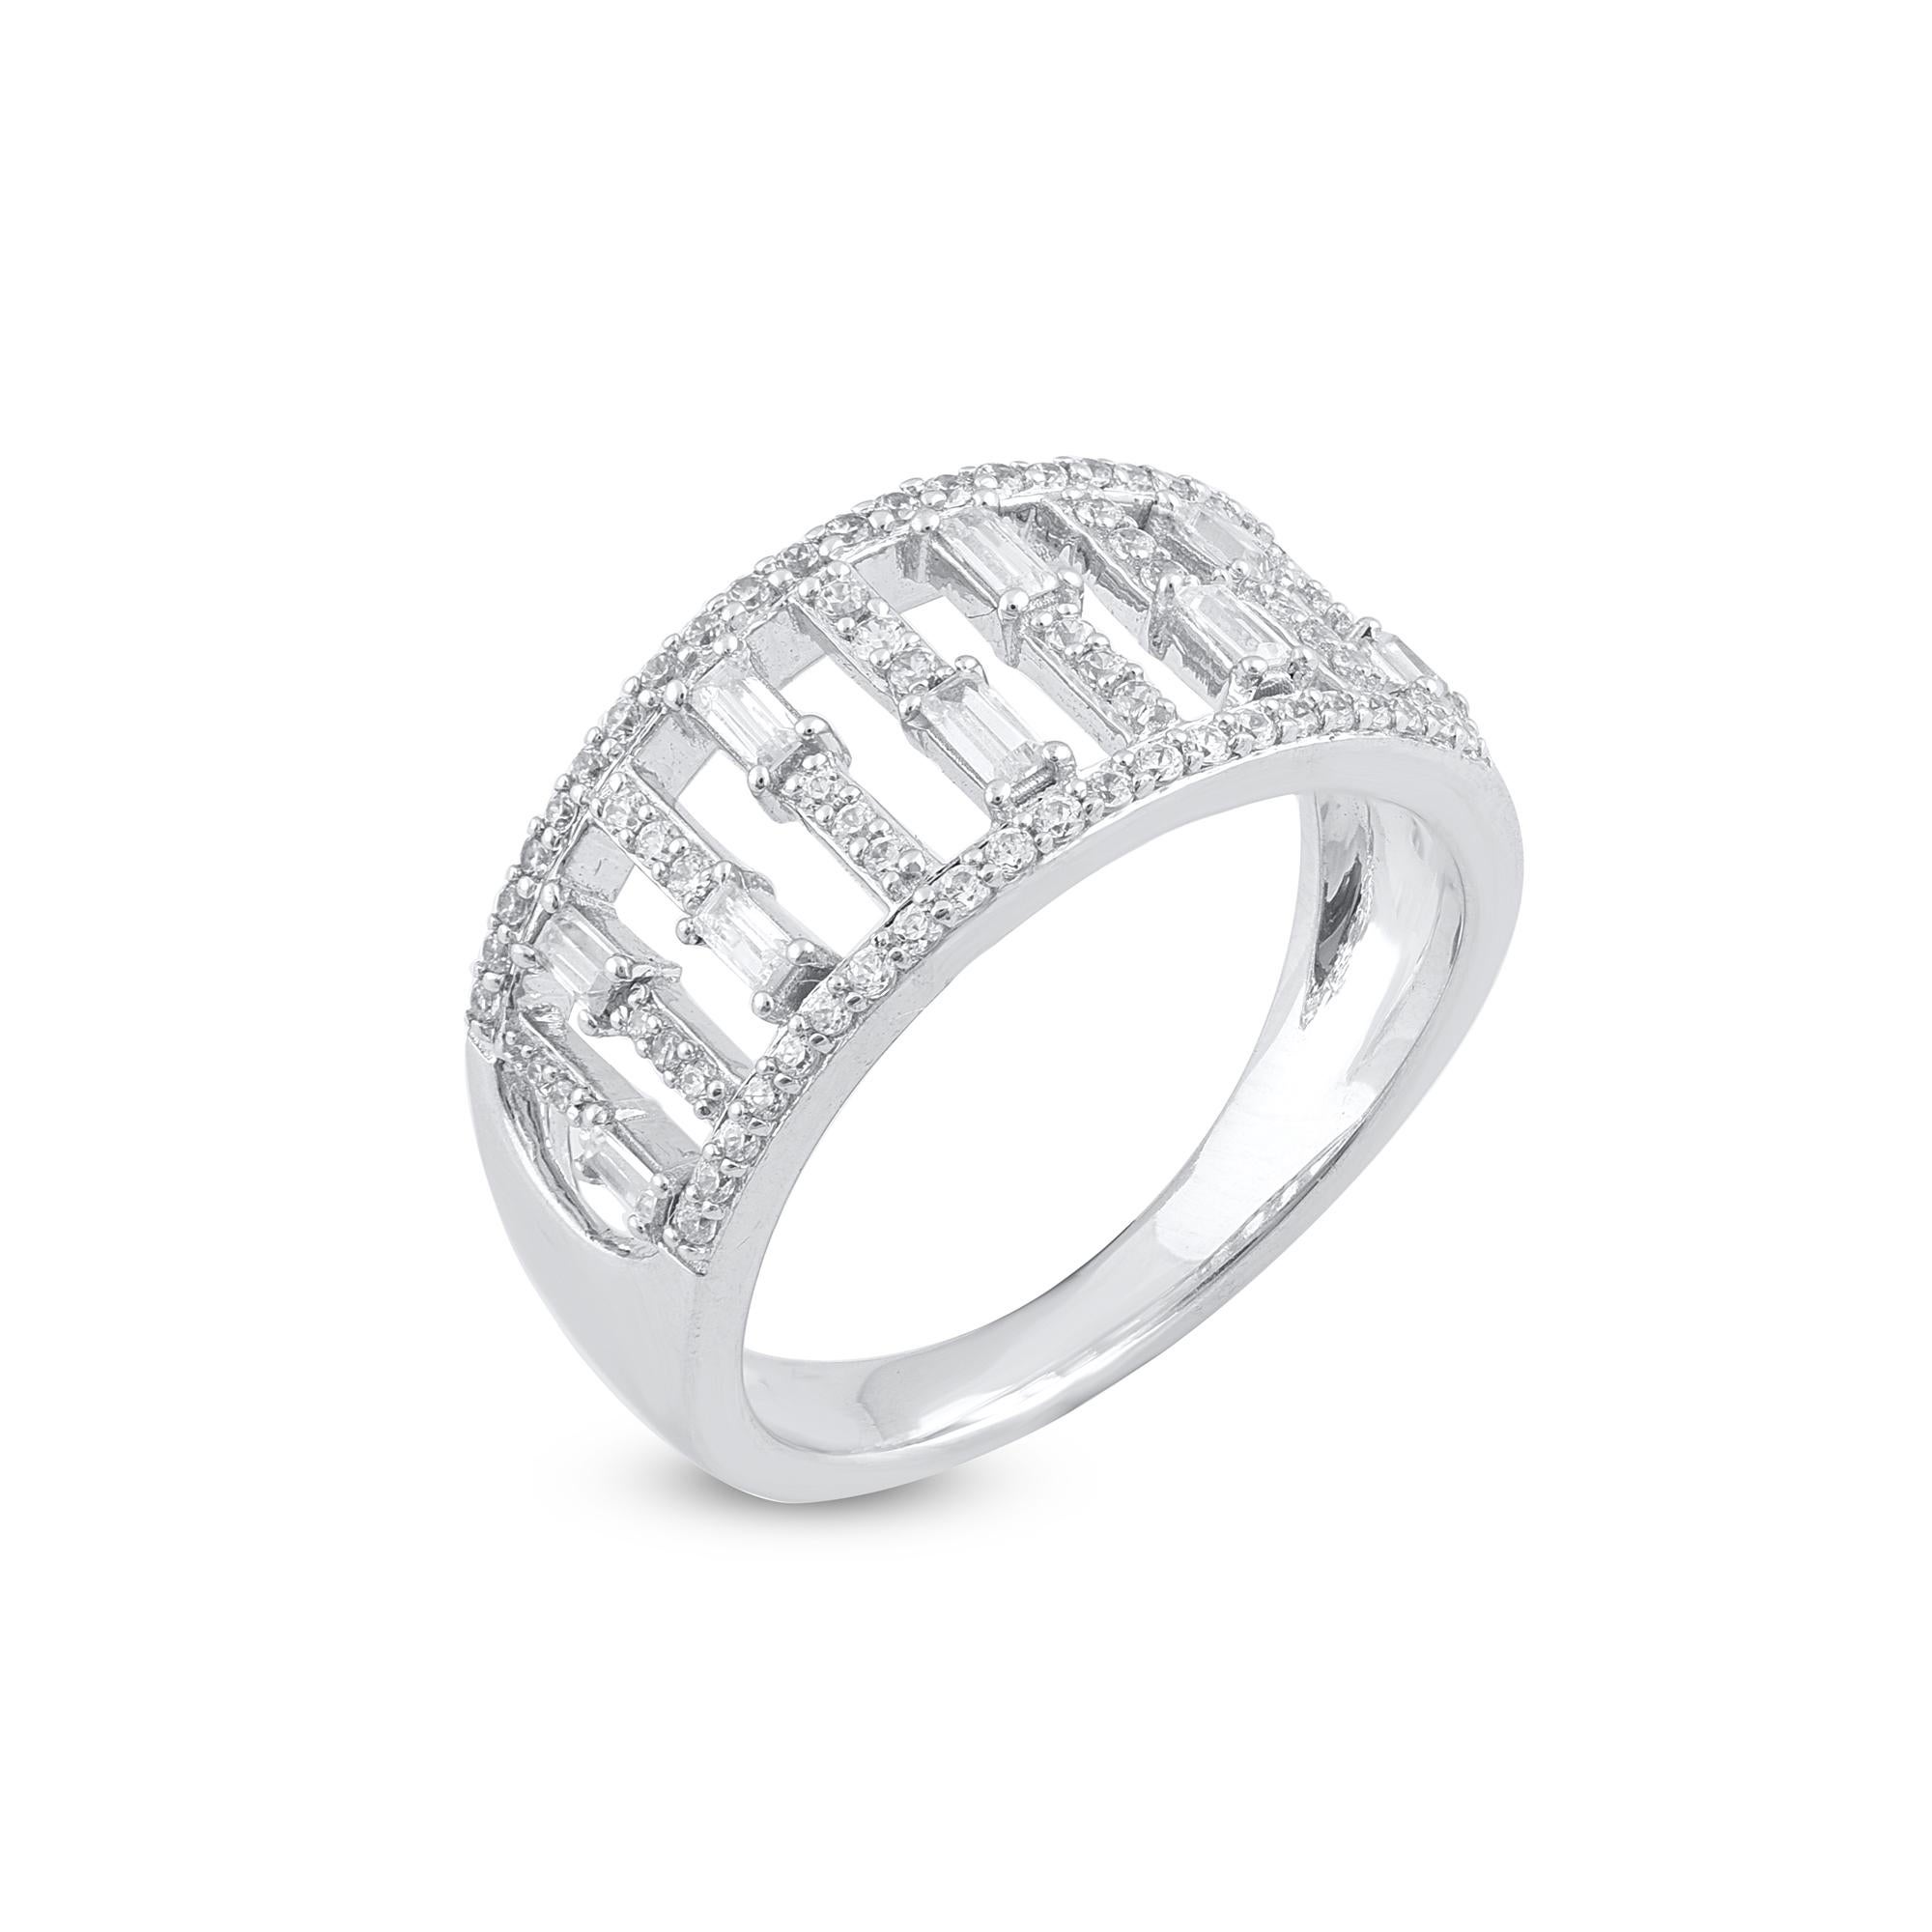 Bring charm to your look with this diamond ring. The ring is crafted from 14-karat gold in your choice of white, rose, or yellow, and features Round Brilliant 69 and Baguette - 9 white diamonds, Prong set, H-I color I2 clarity and a high polish